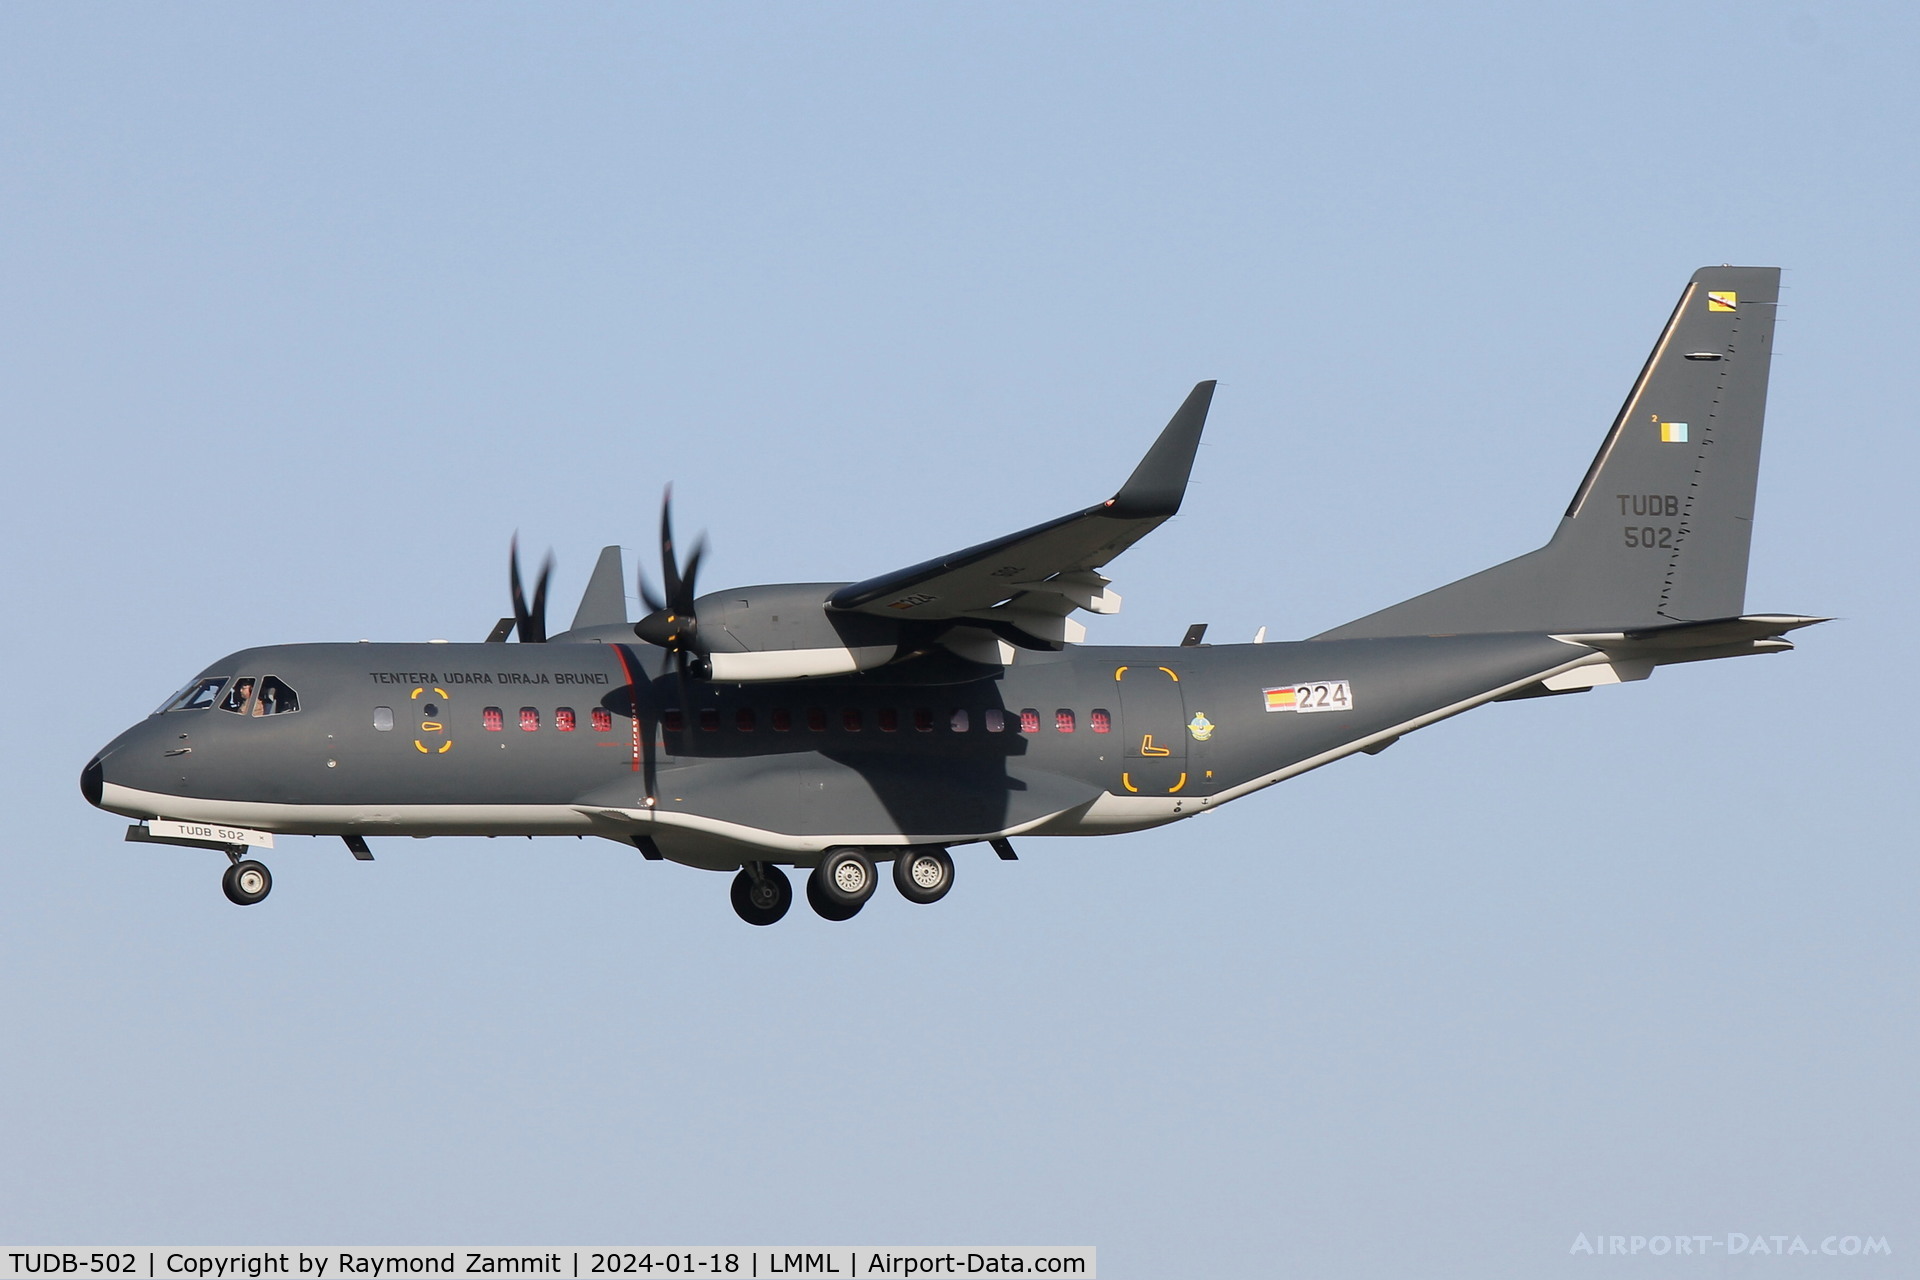 TUDB-502, 2023 Casa C-295W C/N S-224, Casa C-295W TUDB-502 Royal Brunei Air Force